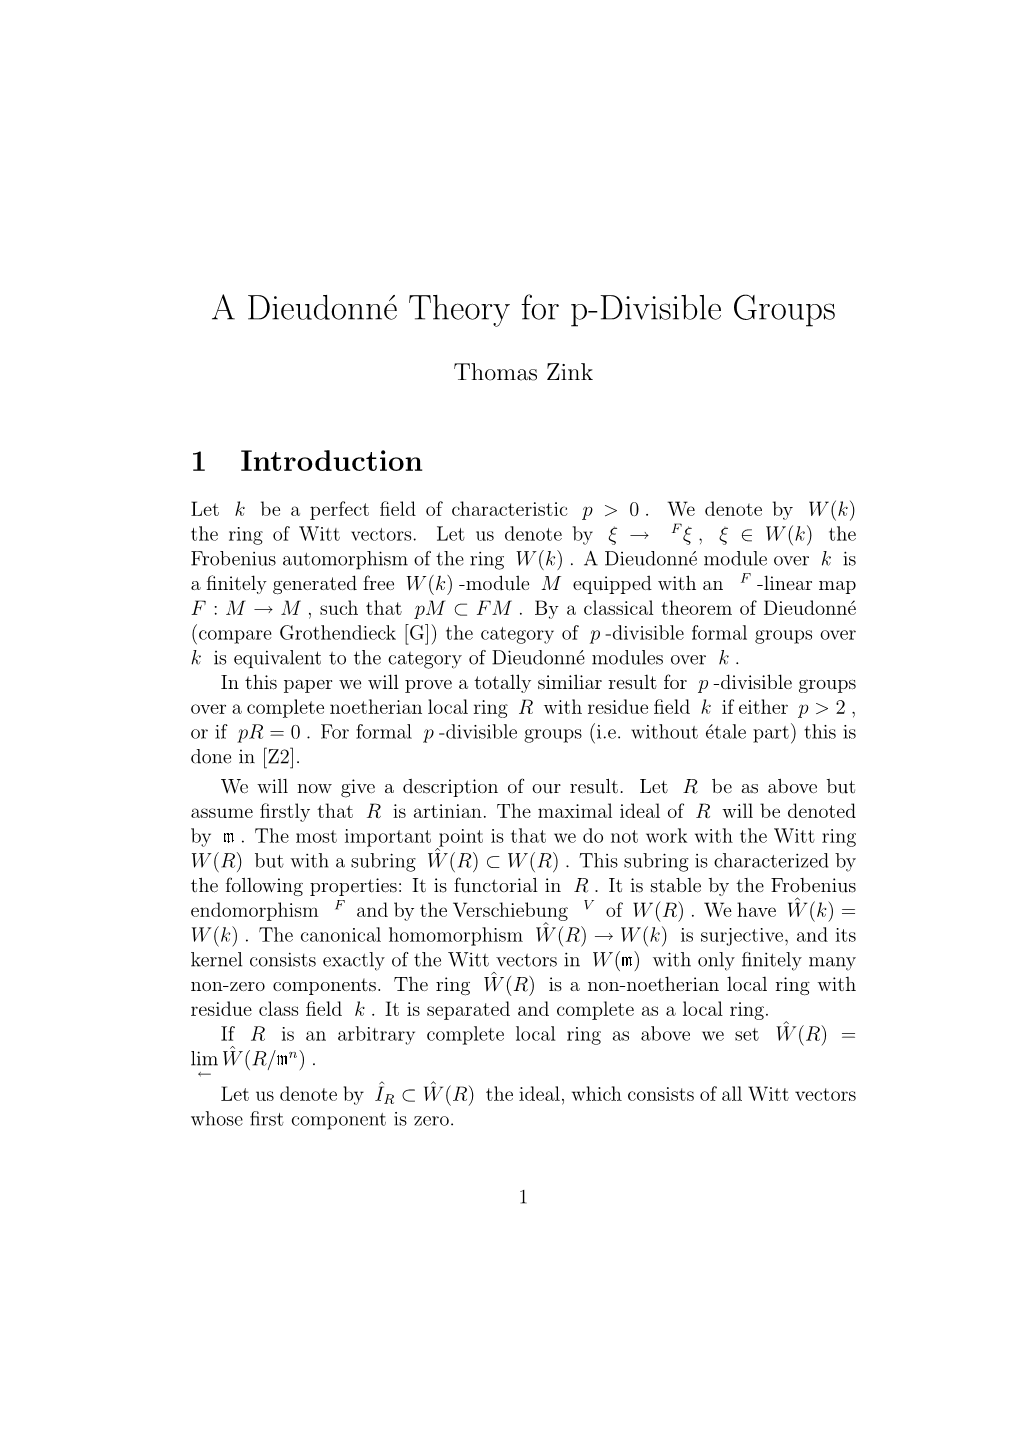 A Dieudonné Theory for P-Divisible Groups